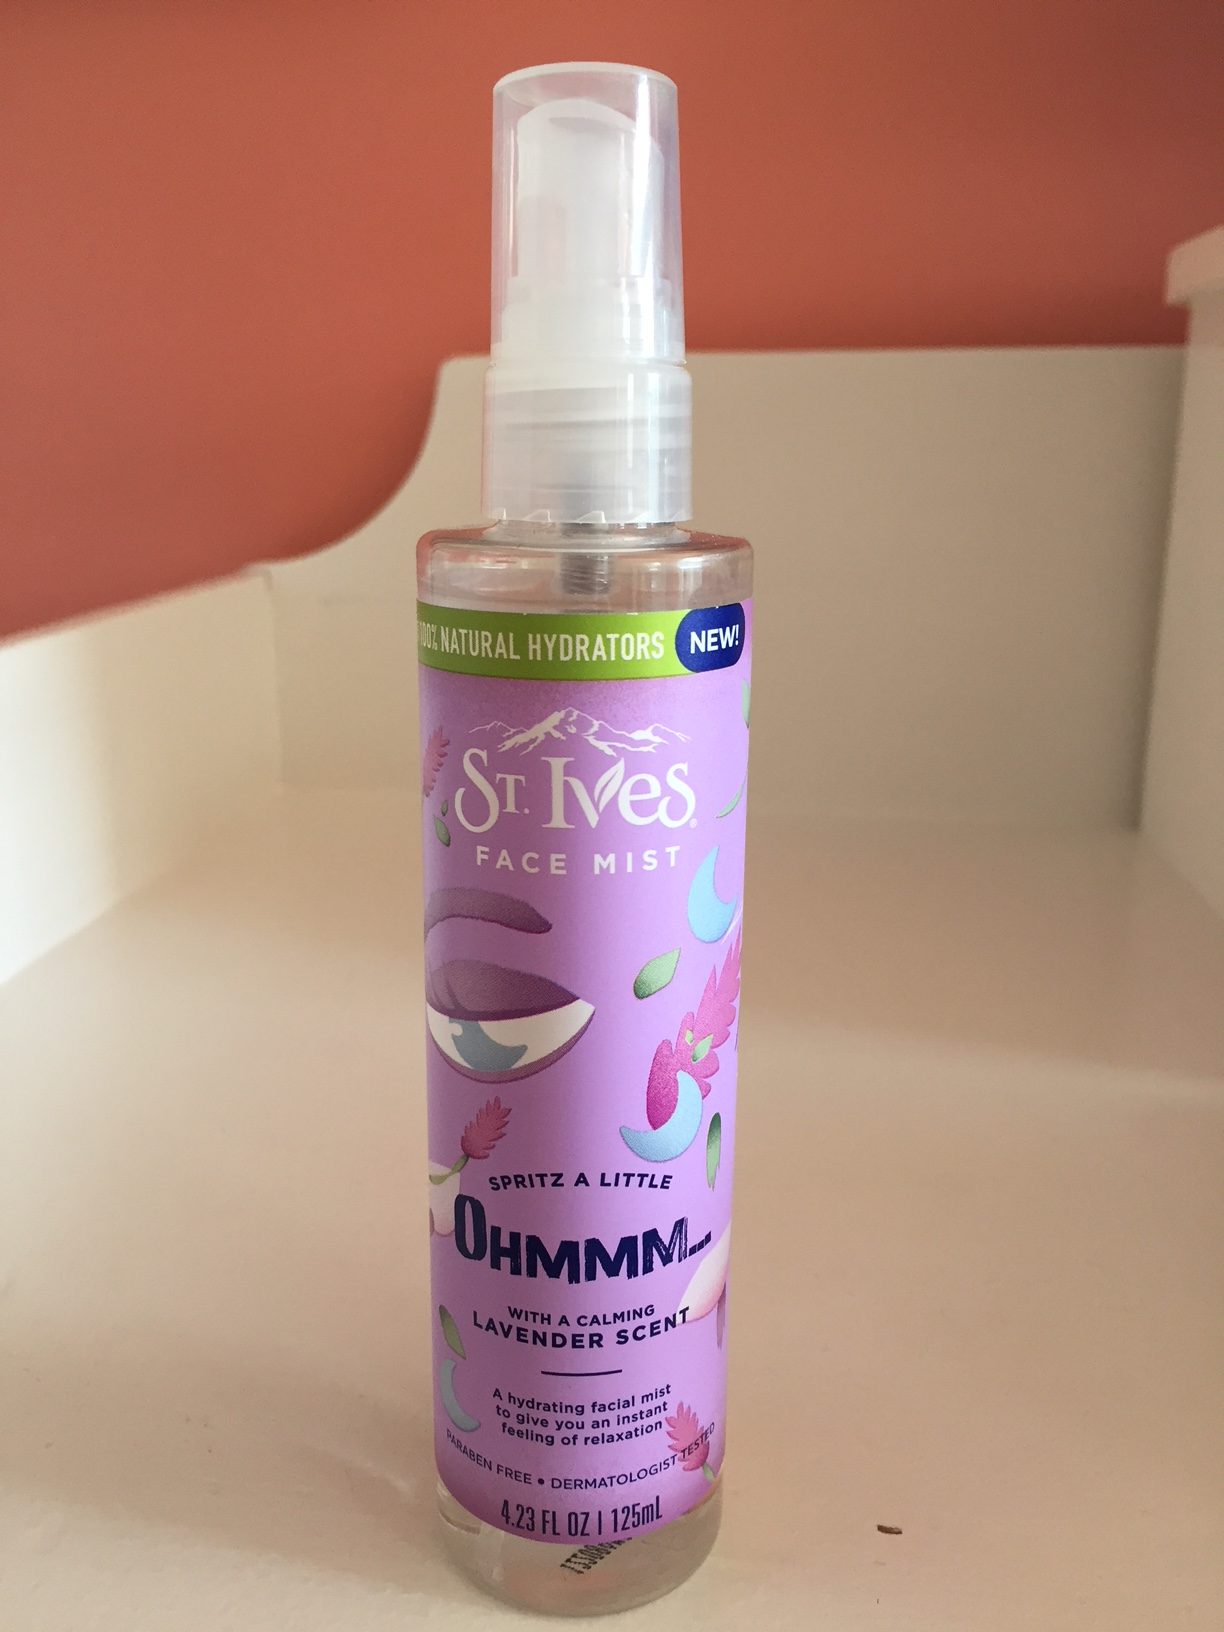 Review, Ingredients, Photos, Skincare Trend, 2019, 2020: Best Relaxing Facial Mists, St. Ives, Ohmmm Lavender